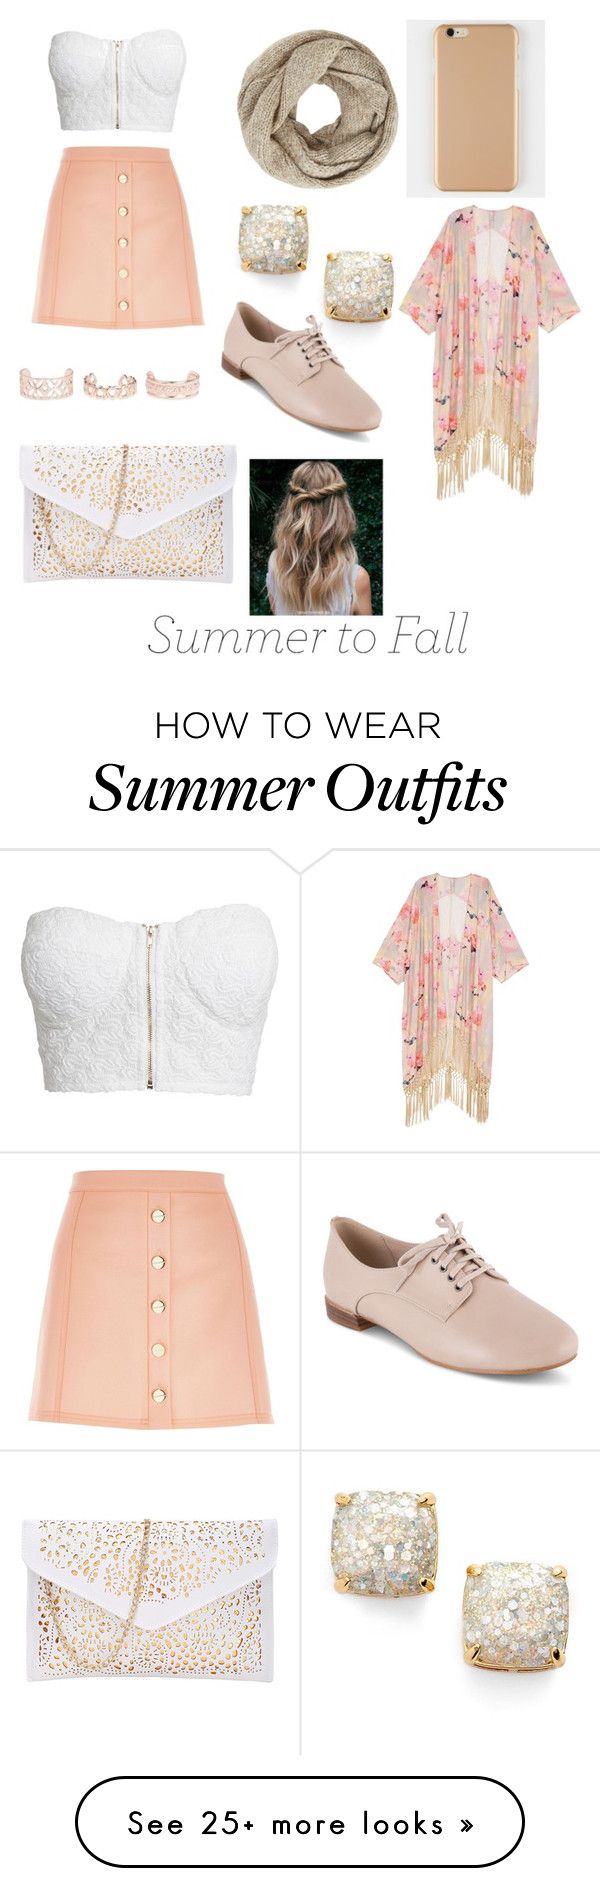 "Fall outfit" by covettfashion on Polyvore featuring NLY Trend, Kate S...